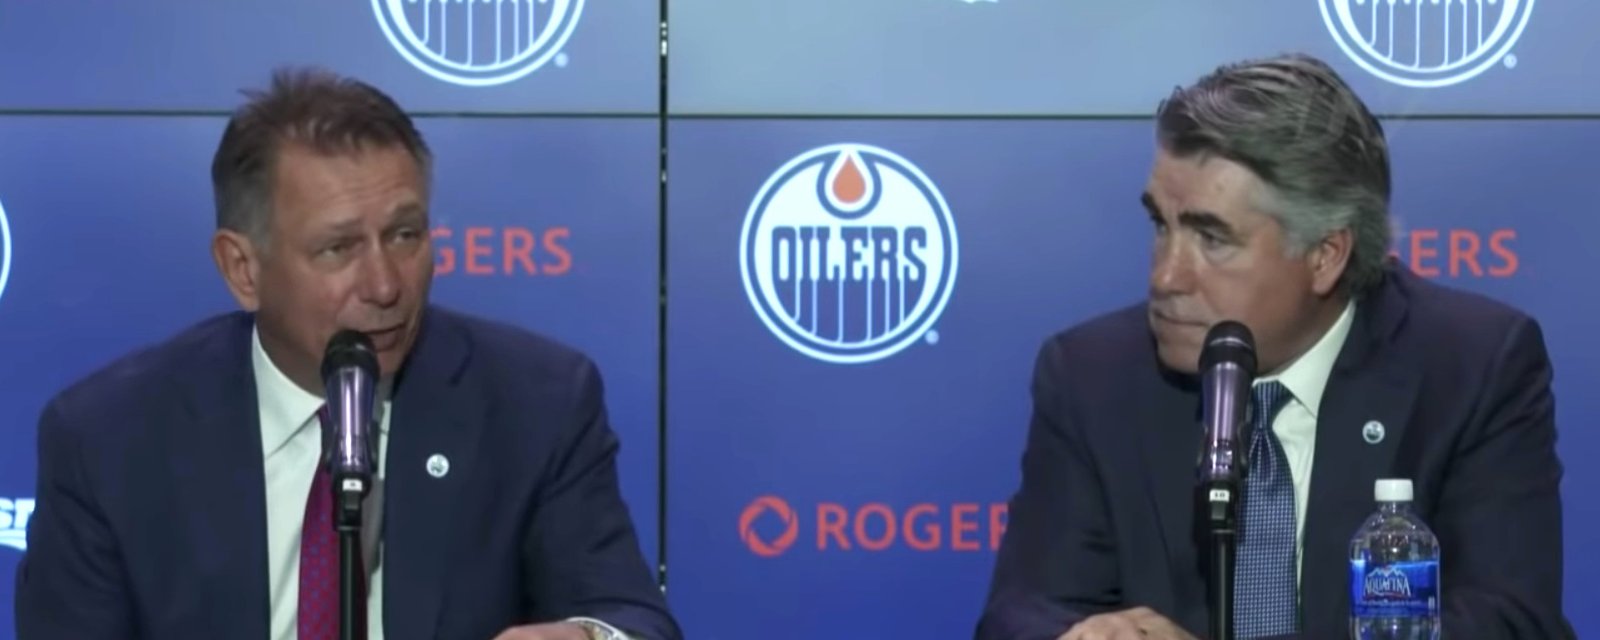 Oilers do the right thing after facing criticism from fans.